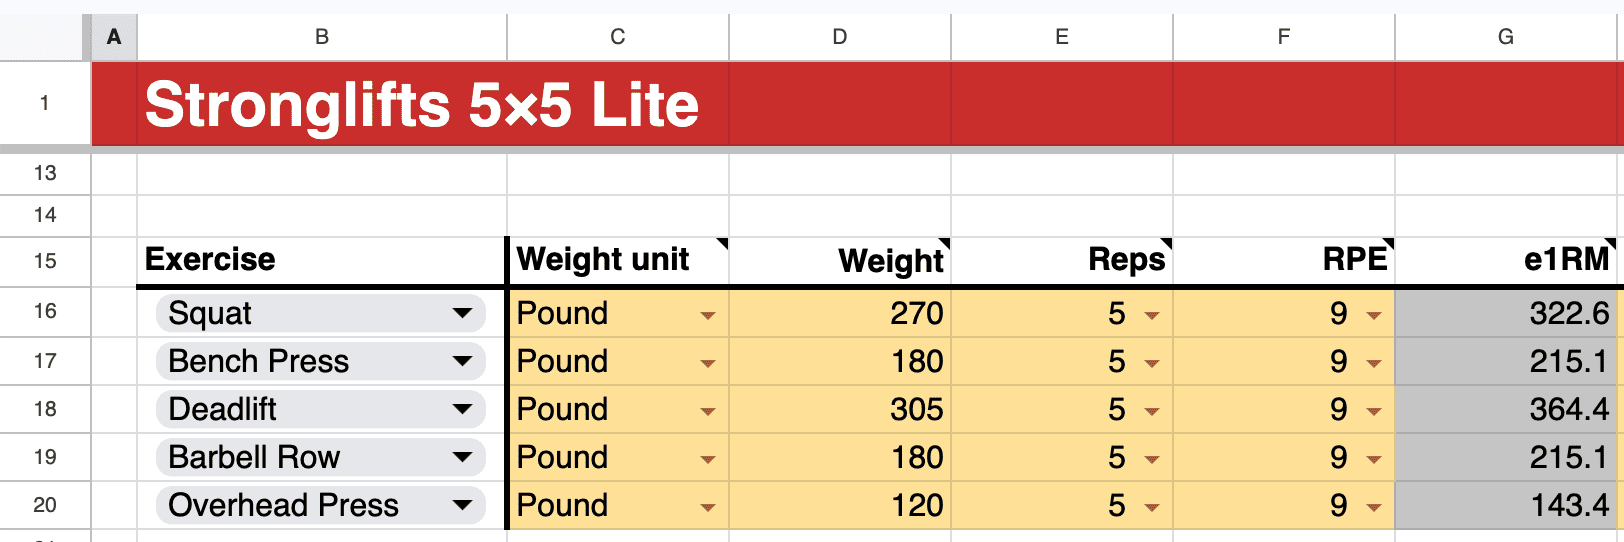 Estimated one rep max calculated